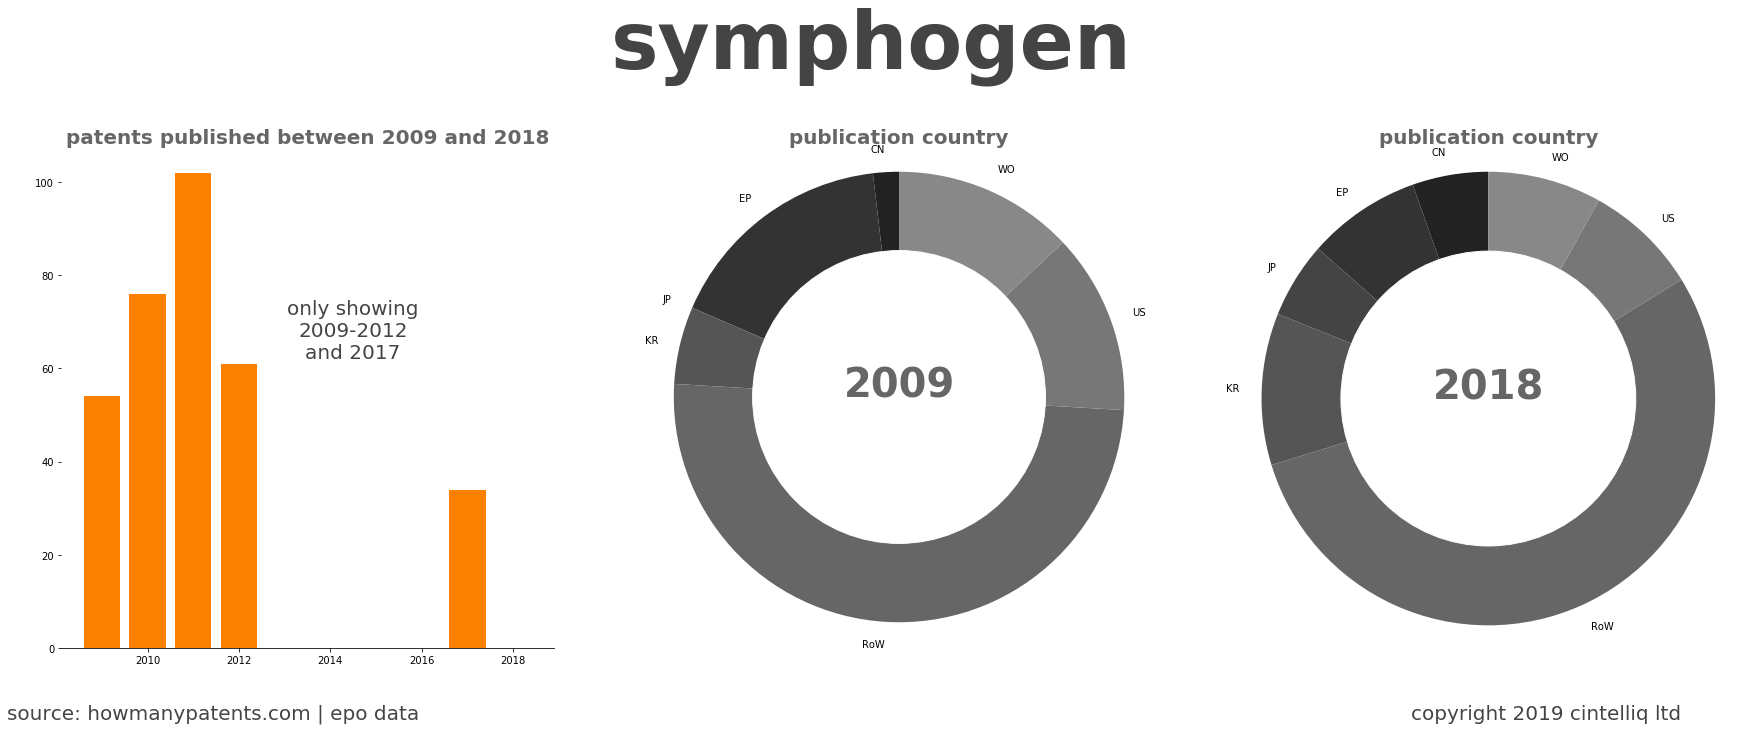 summary of patents for Symphogen